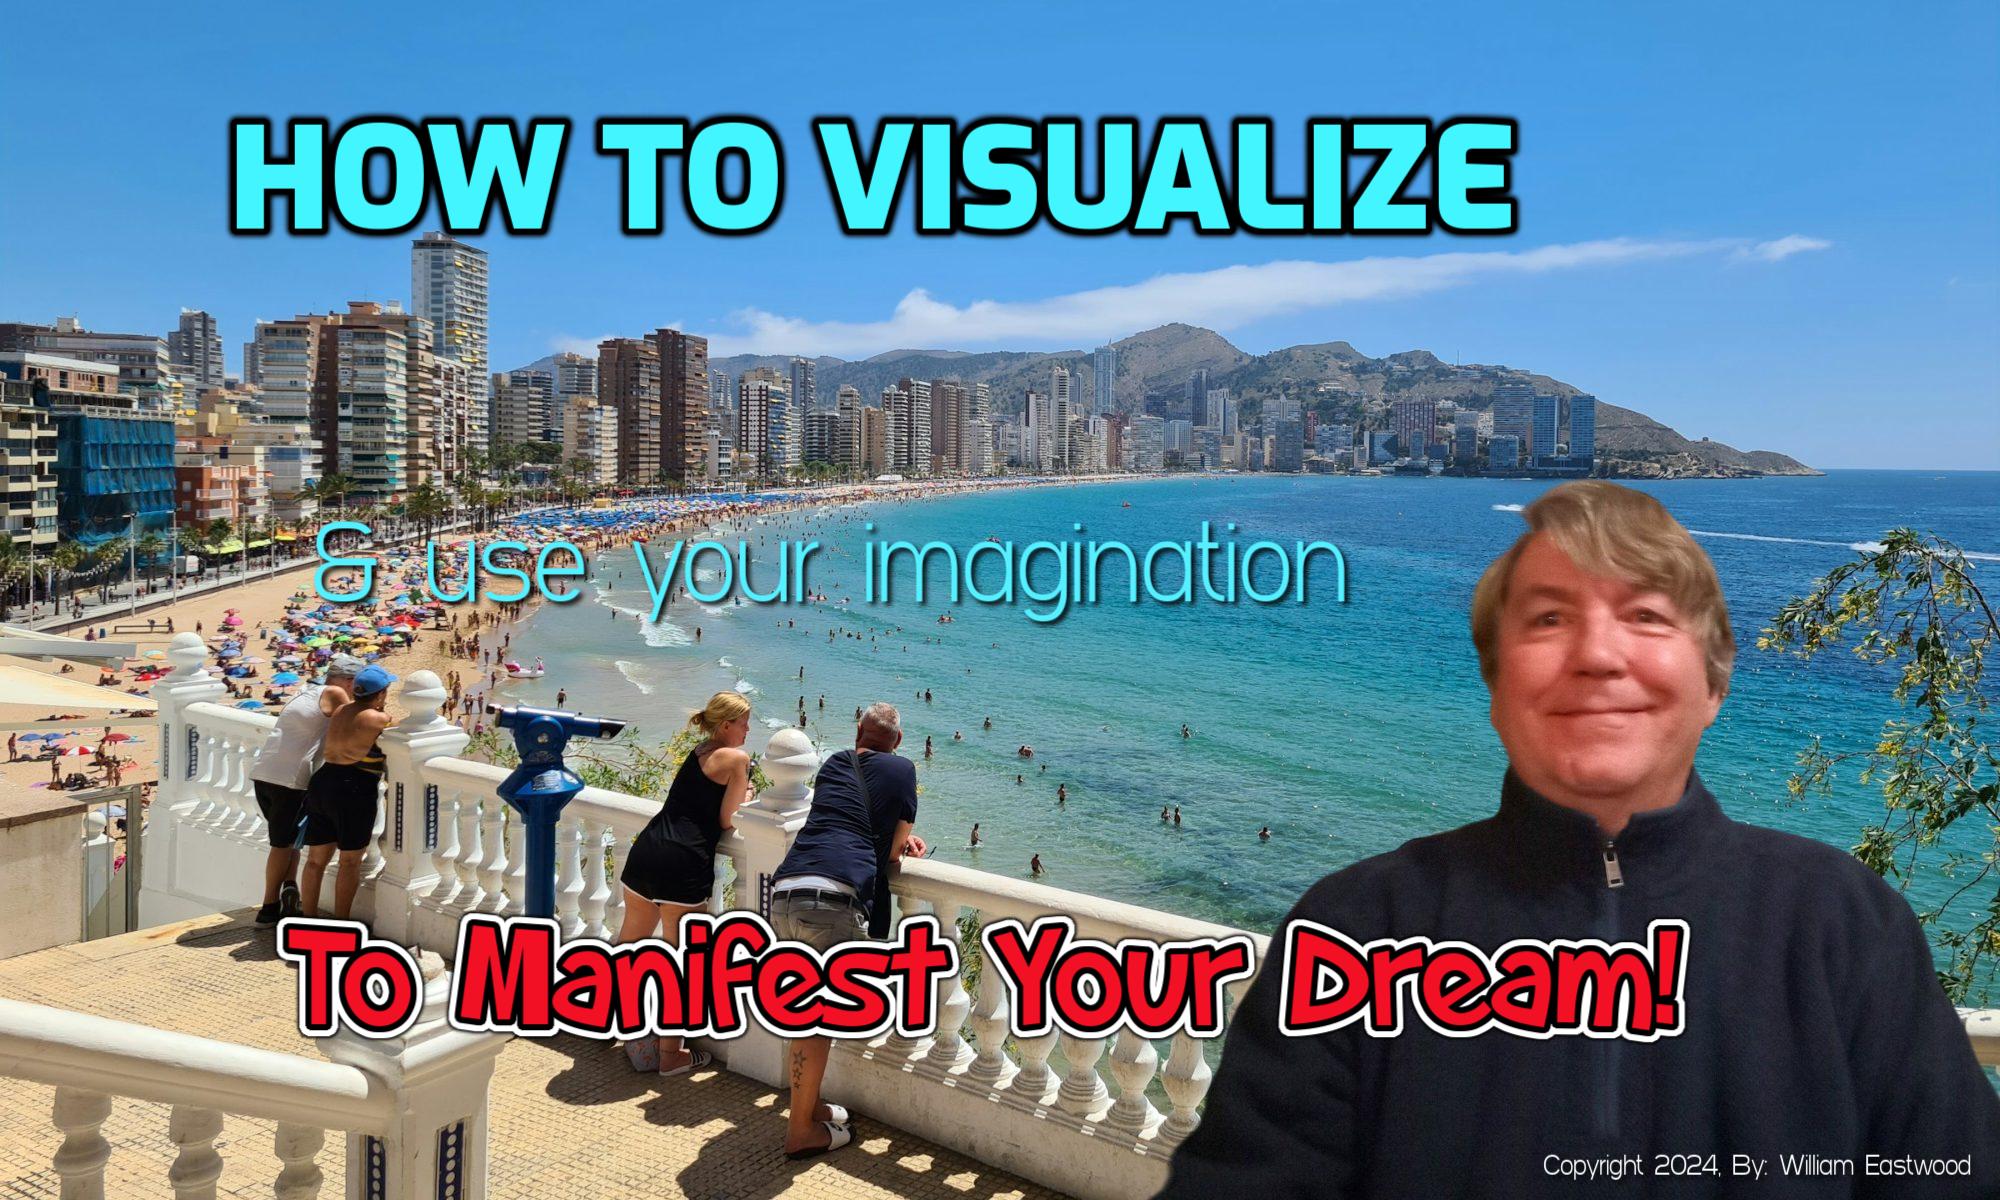 How to Use Visualization & Imagination to Materialize Events: Does a Mental Image Create Physical Matter?